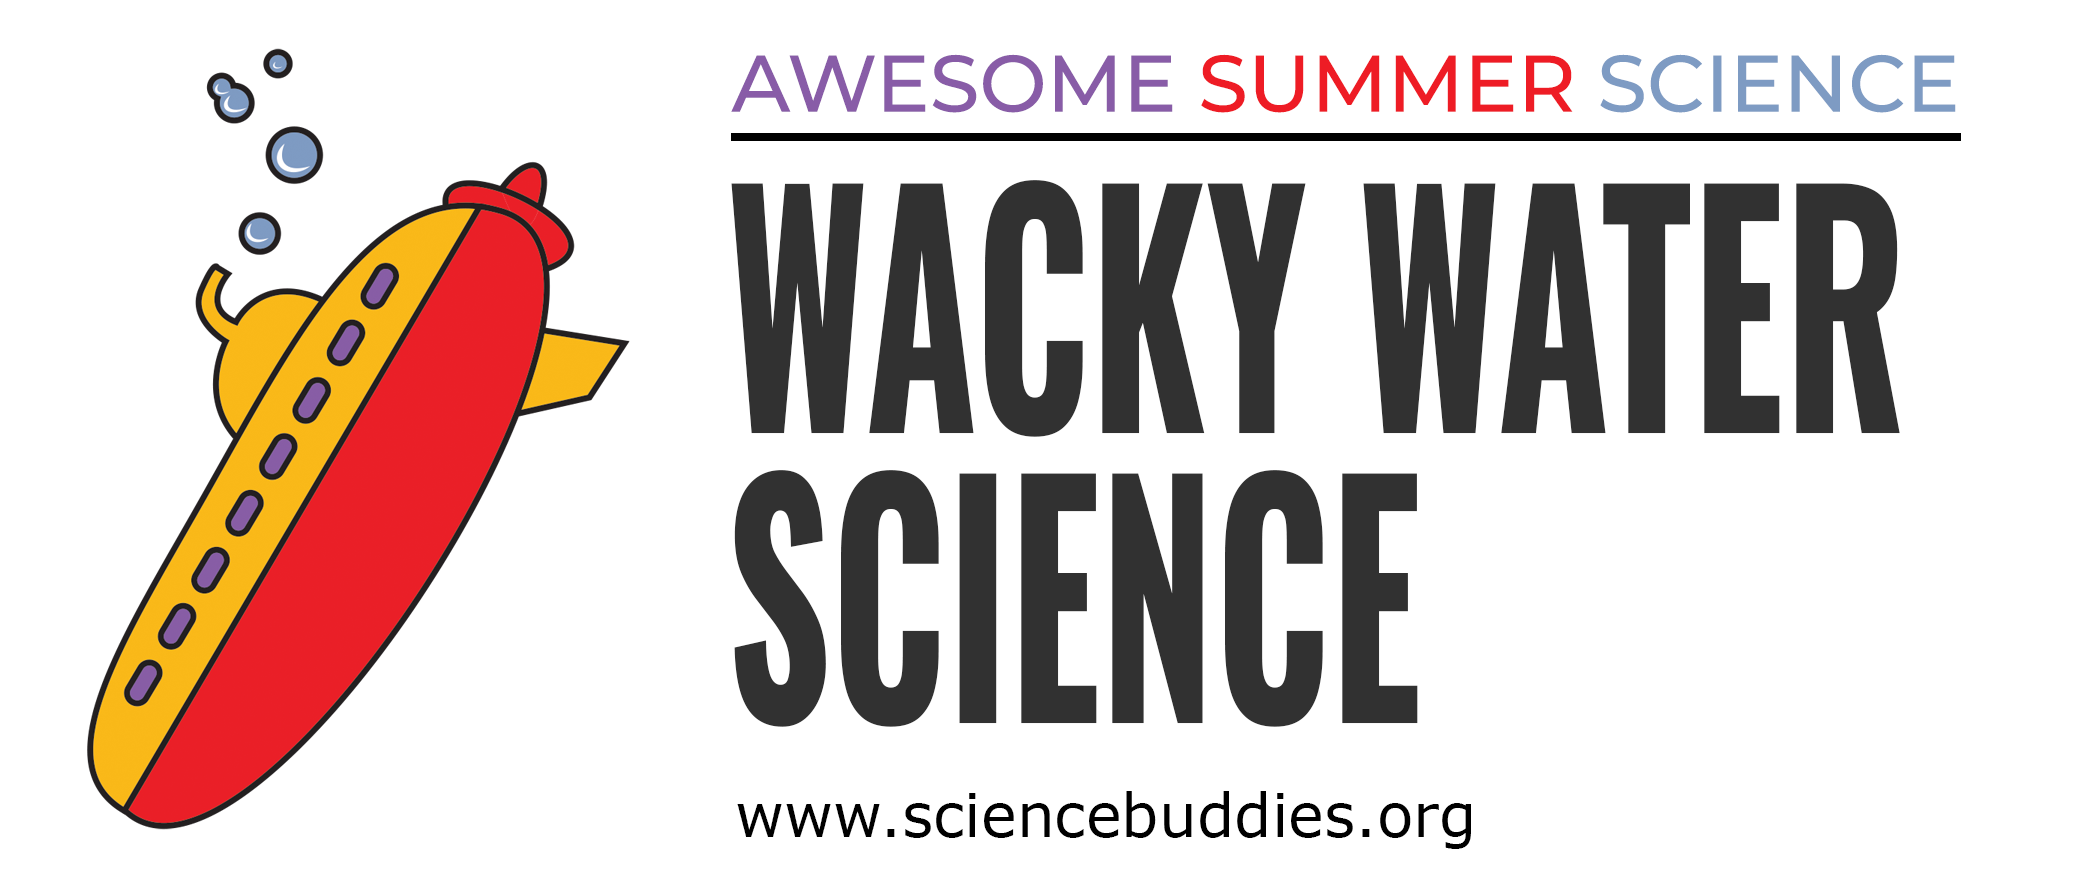 Submarine for Wacky Water Science Week 8 of Awesome Summer Science with Science Buddies